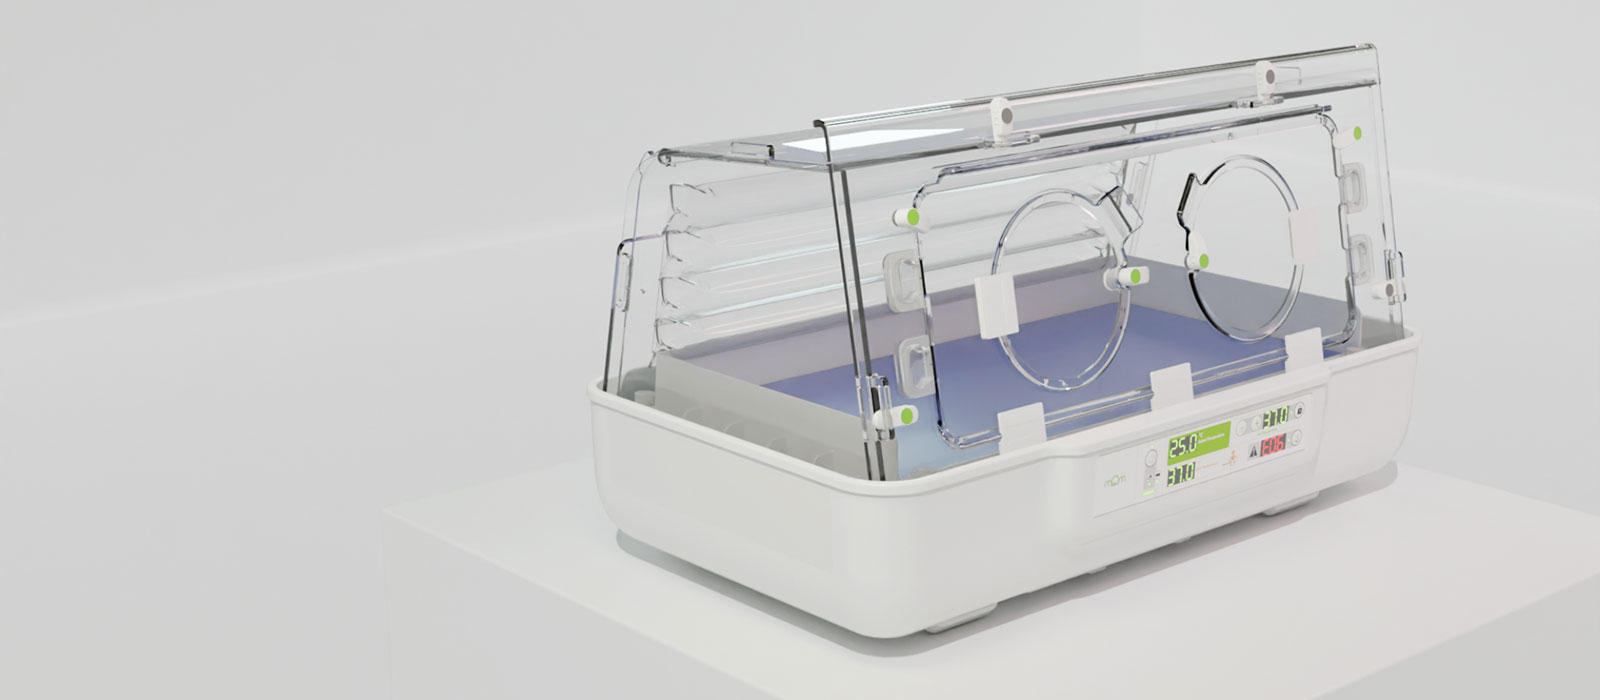 Neonatal Incubator Developed by mOm and eg technology Achieves CE Mark